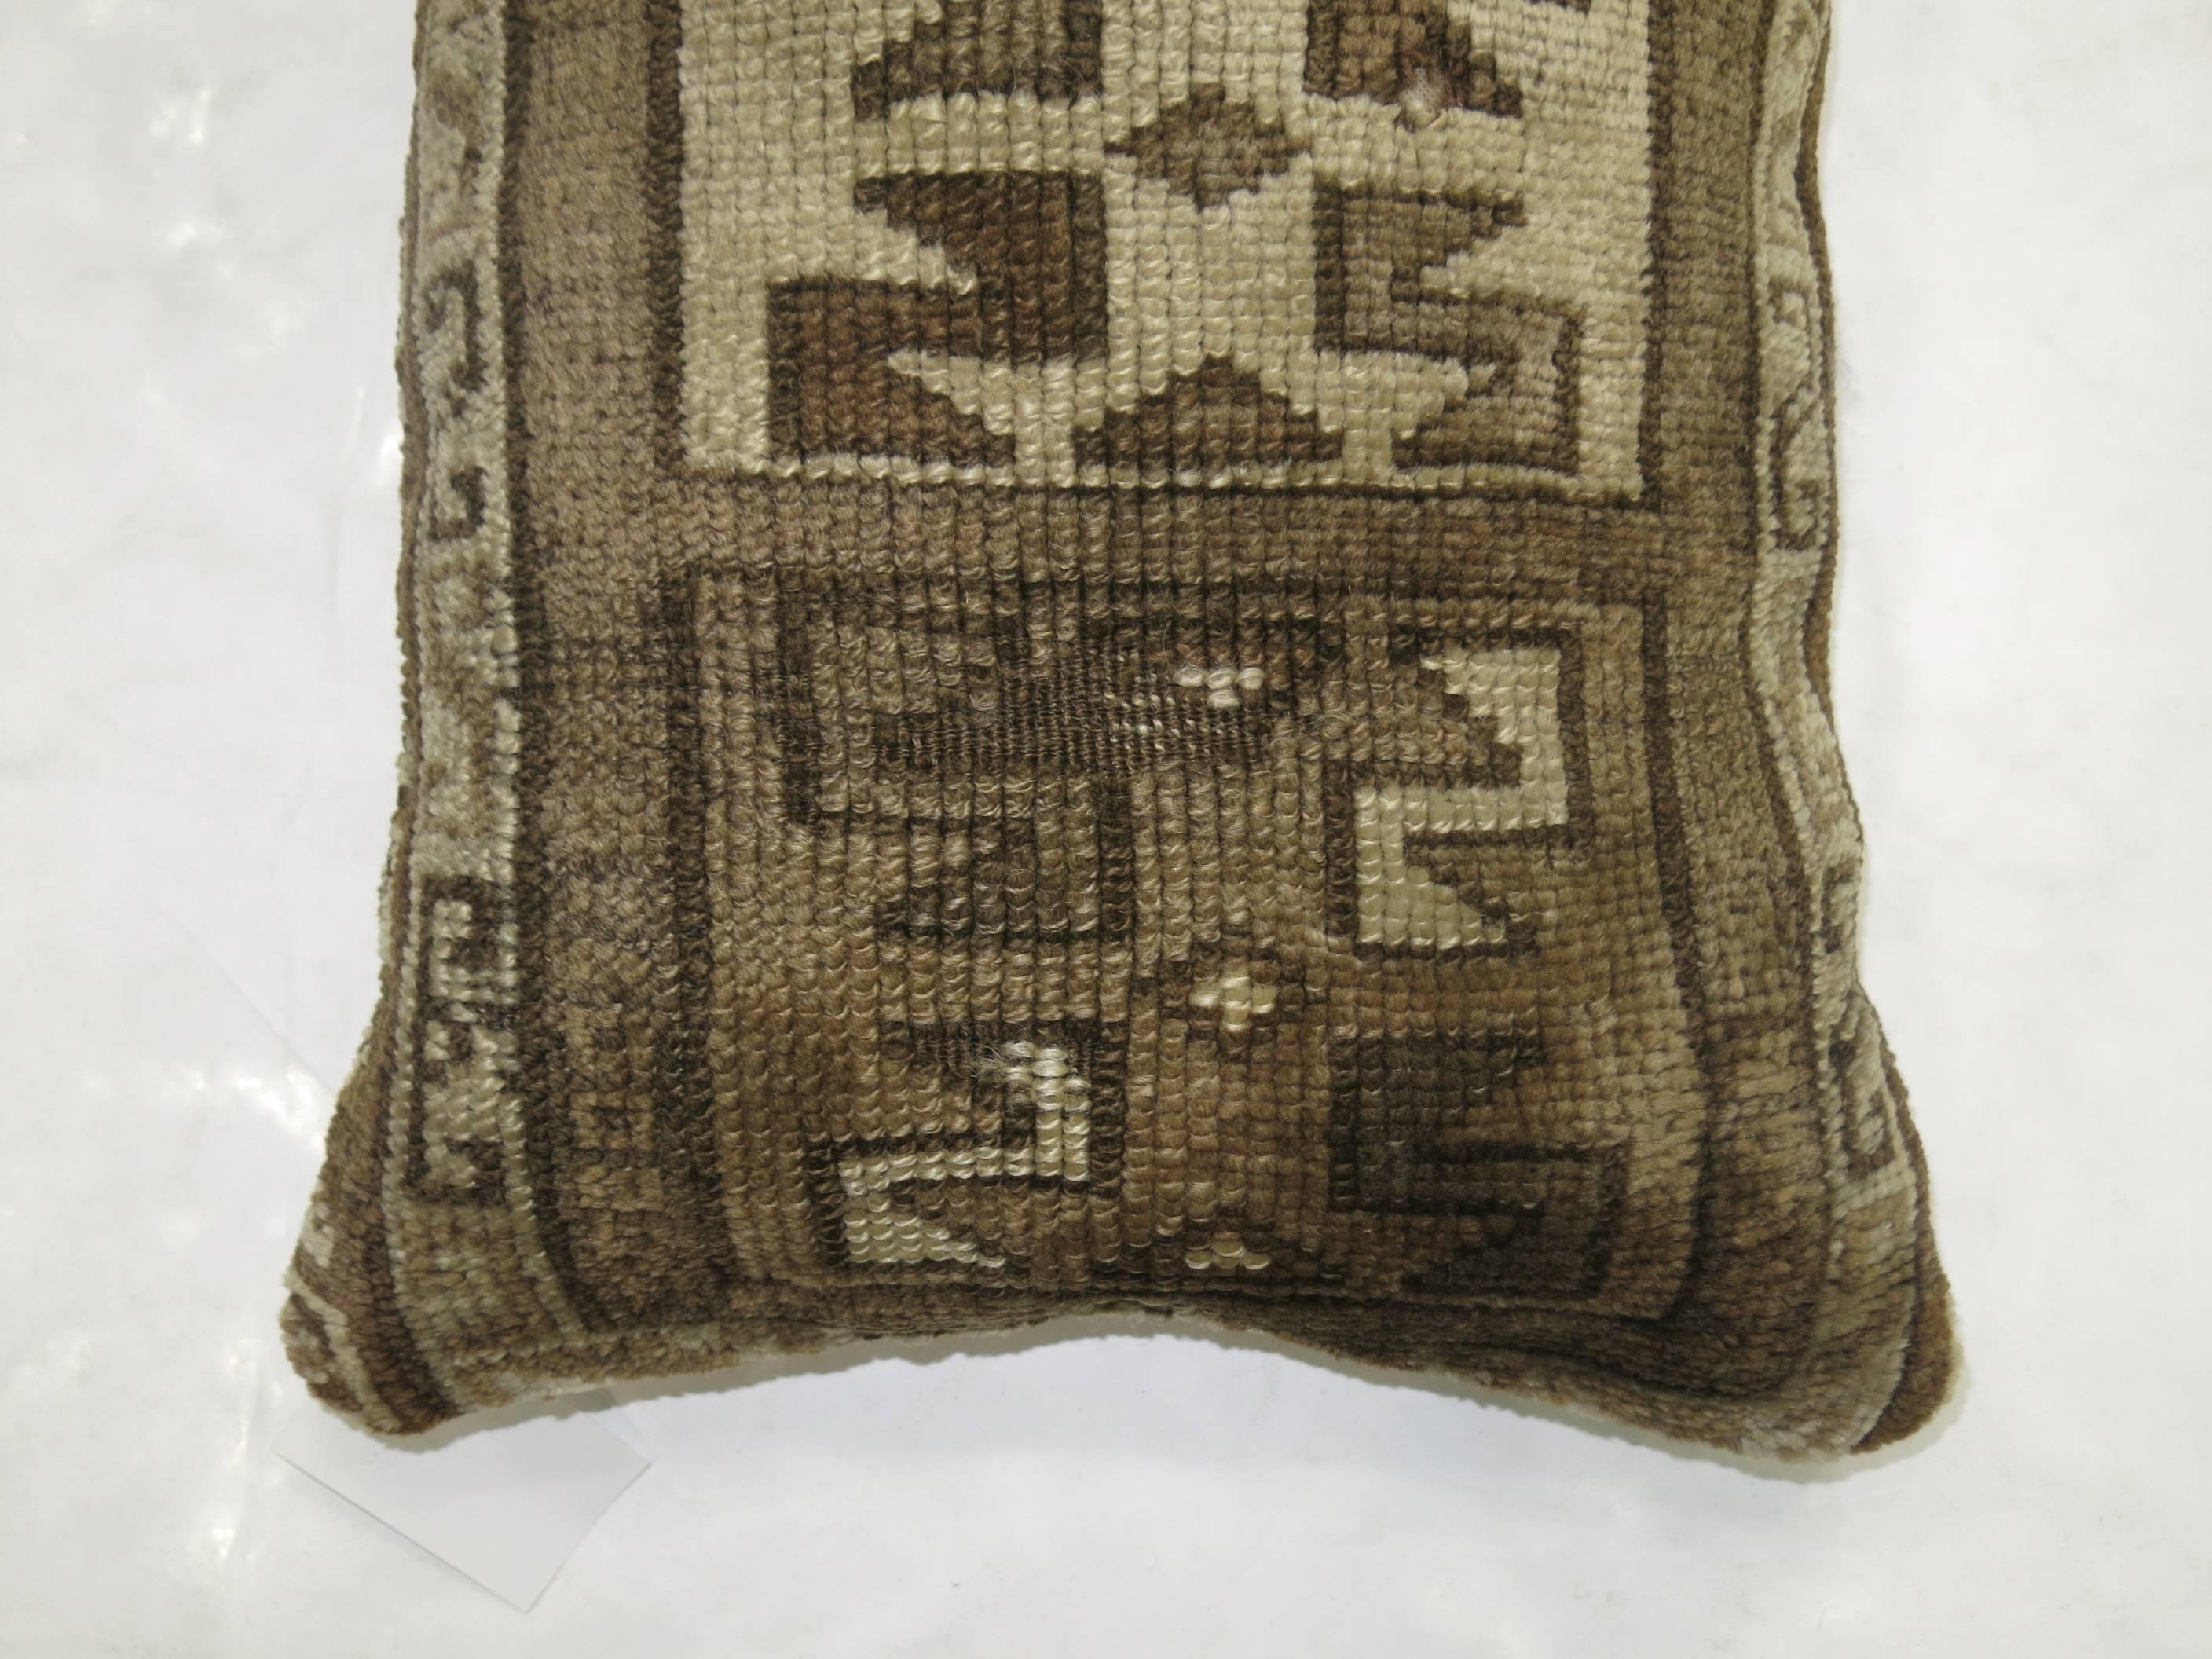 Pillow made from a vintage Turkish kars rug with a tribal motif in brown

17'' x 24''